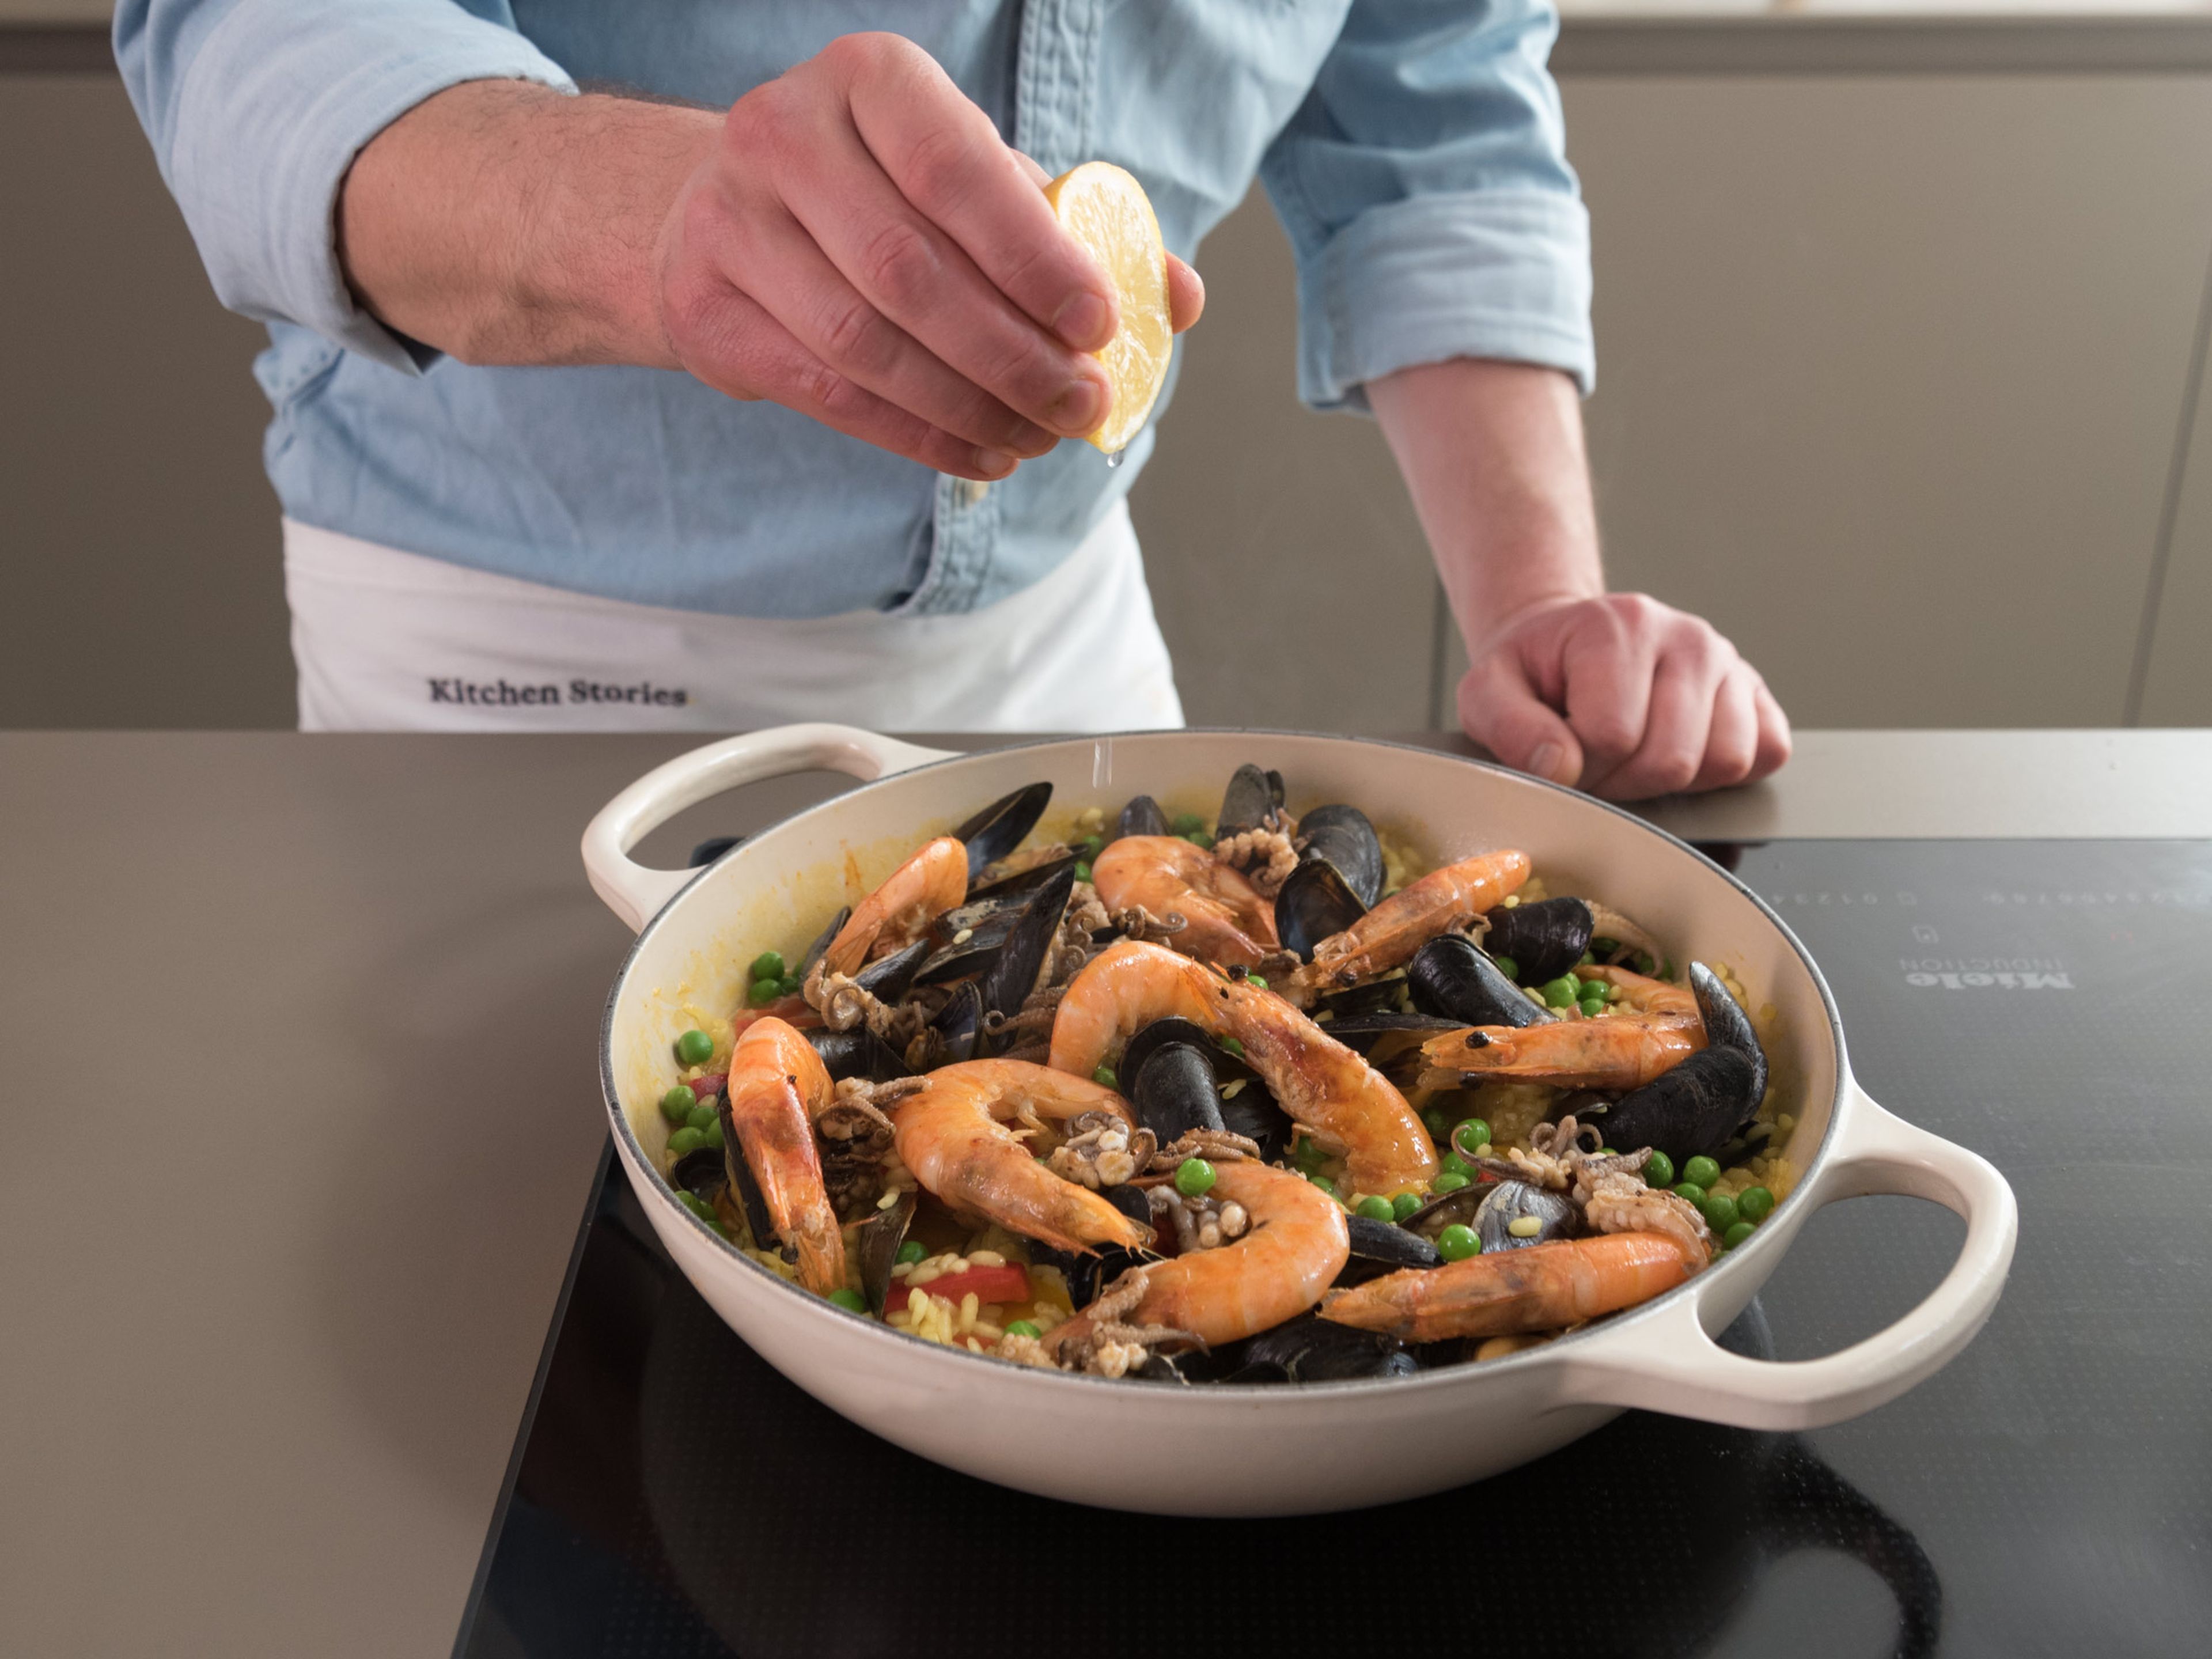 Cover with a kitchen towel and let rest for approx. 5 min. Afterwards, sort out unopened mussels and discard. Season with salt, pepper, and lemon juice and serve with basil. Enjoy!